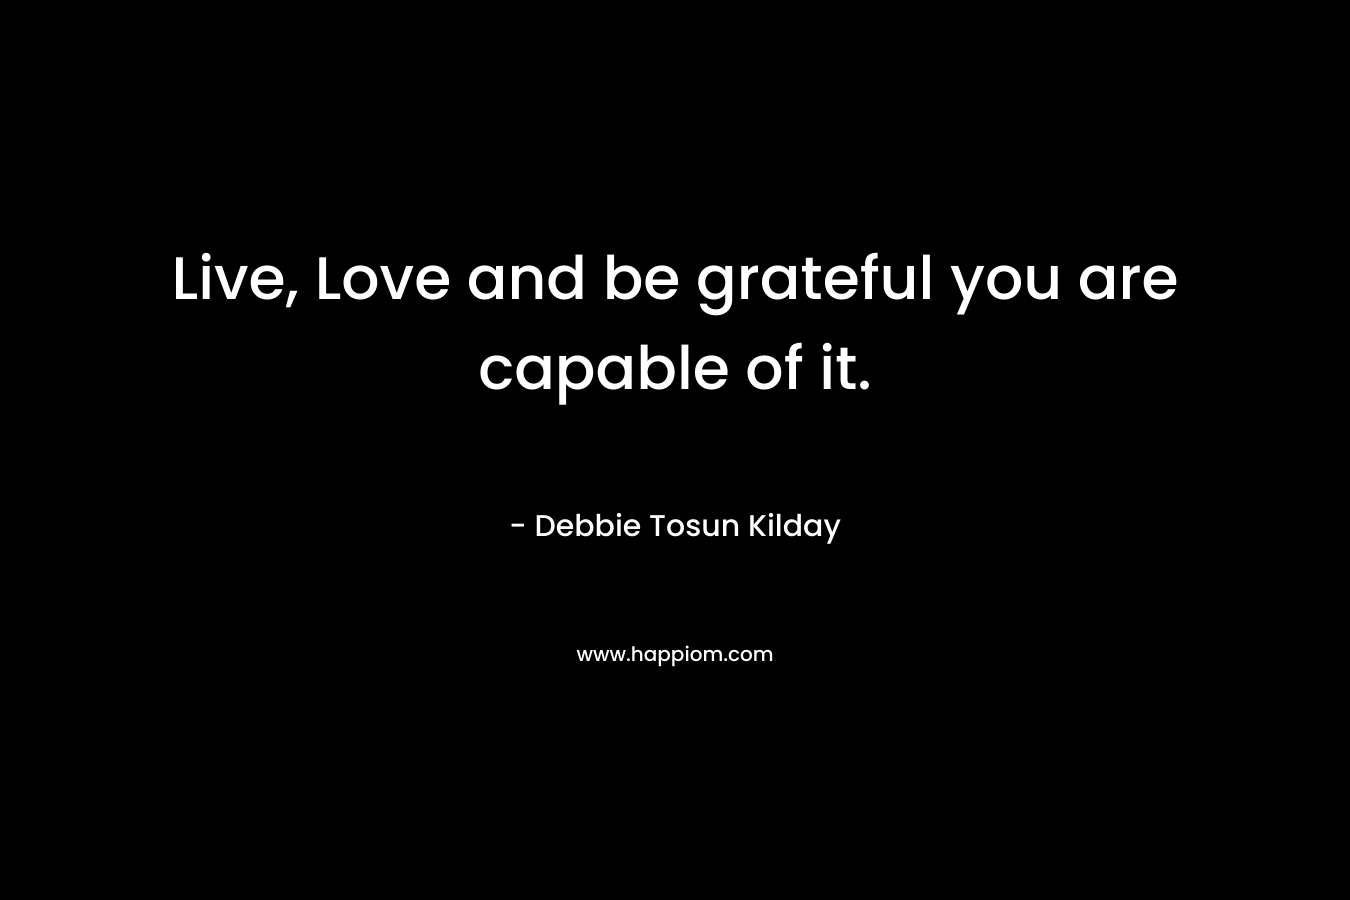 Live, Love and be grateful you are capable of it.